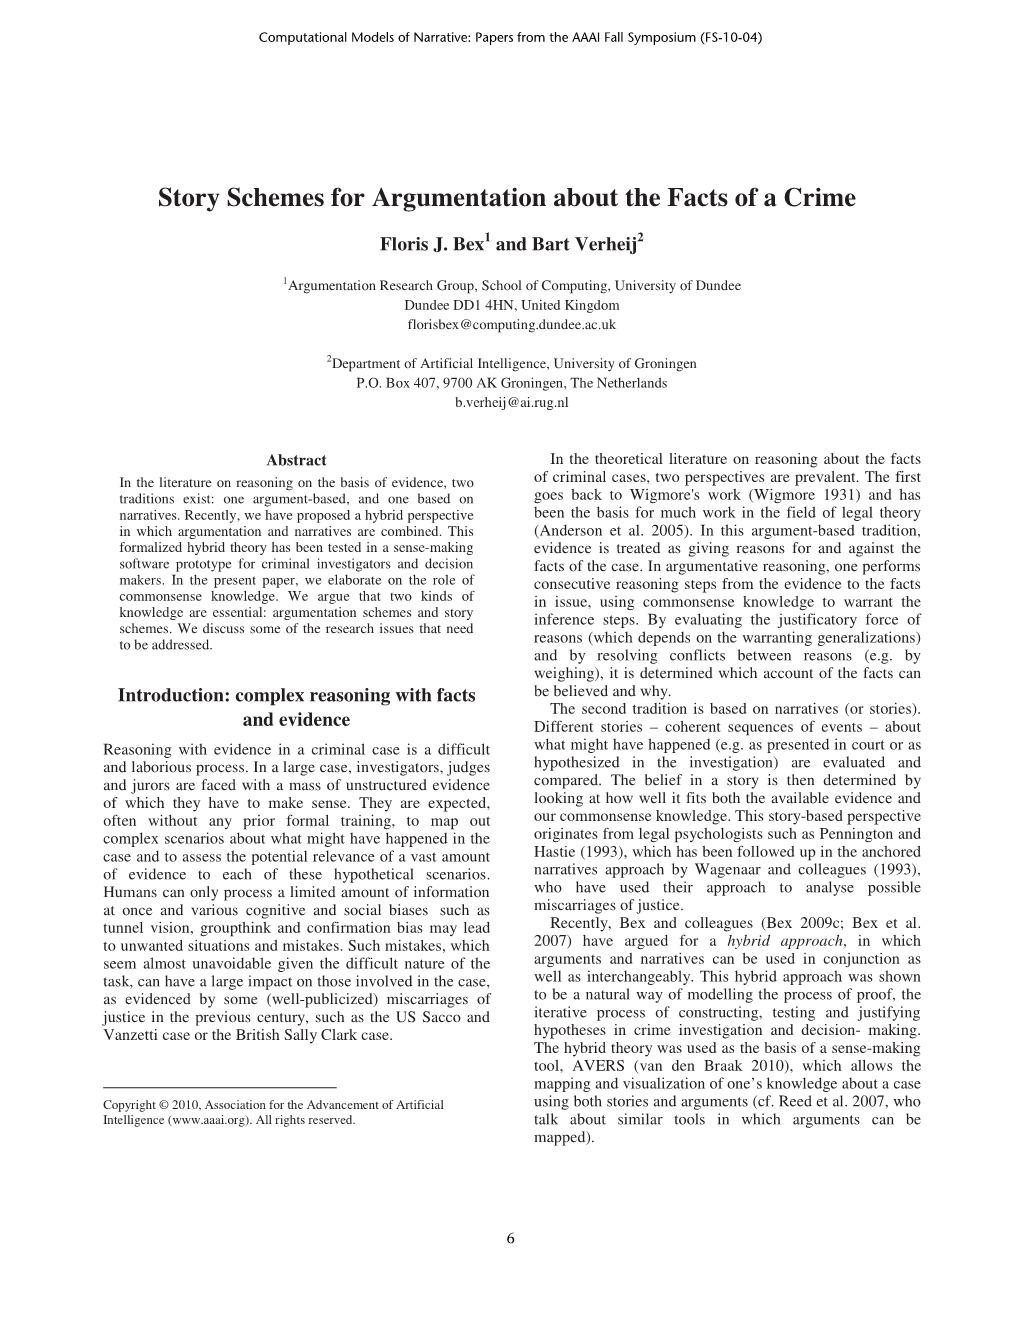 Story Schemes for Argumentation About the Facts of a Crime